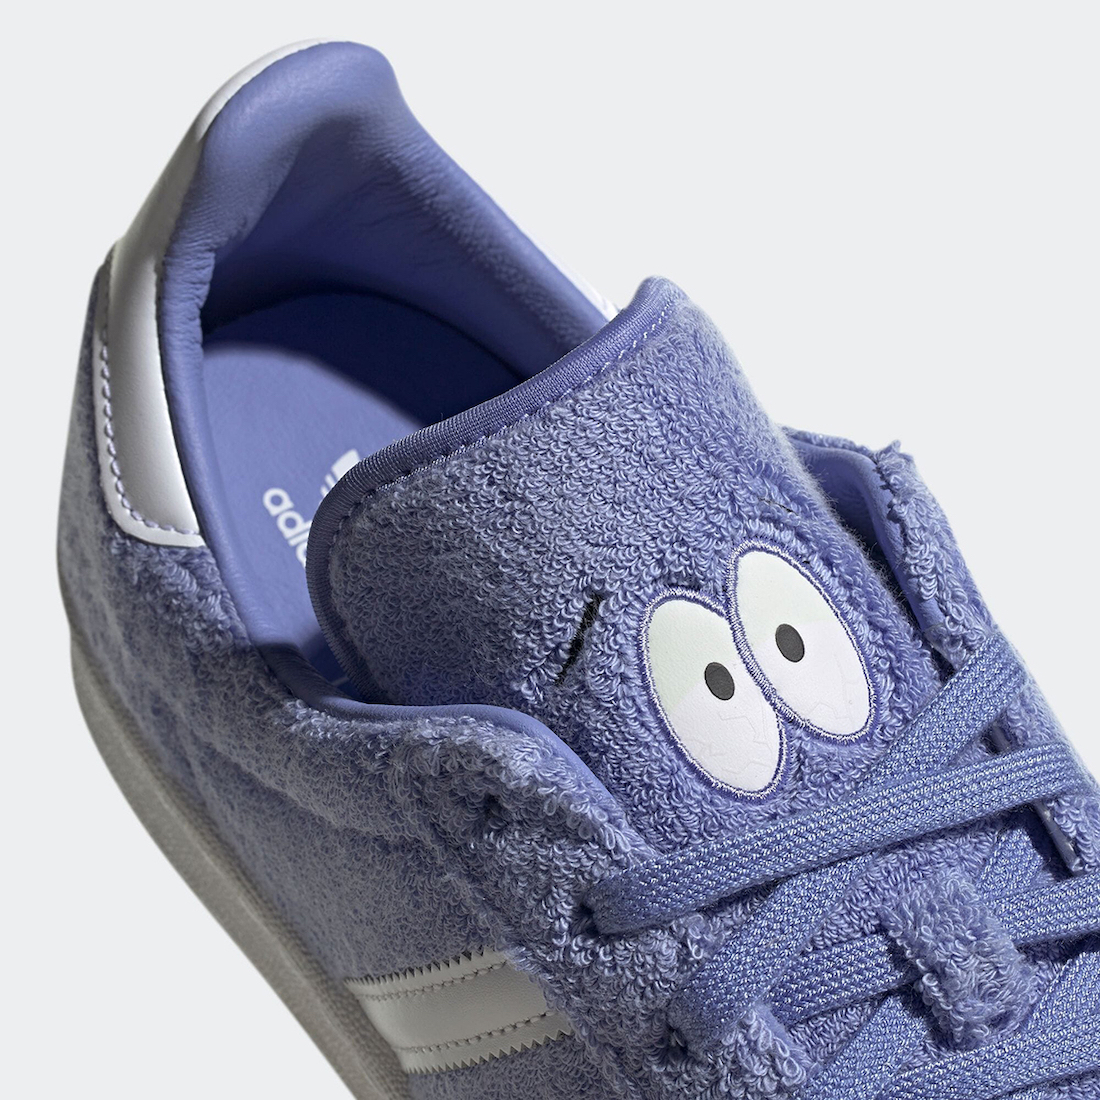 South-Park-adidas-Campus-80s-Towelie-GZ9177-Release-Date-6